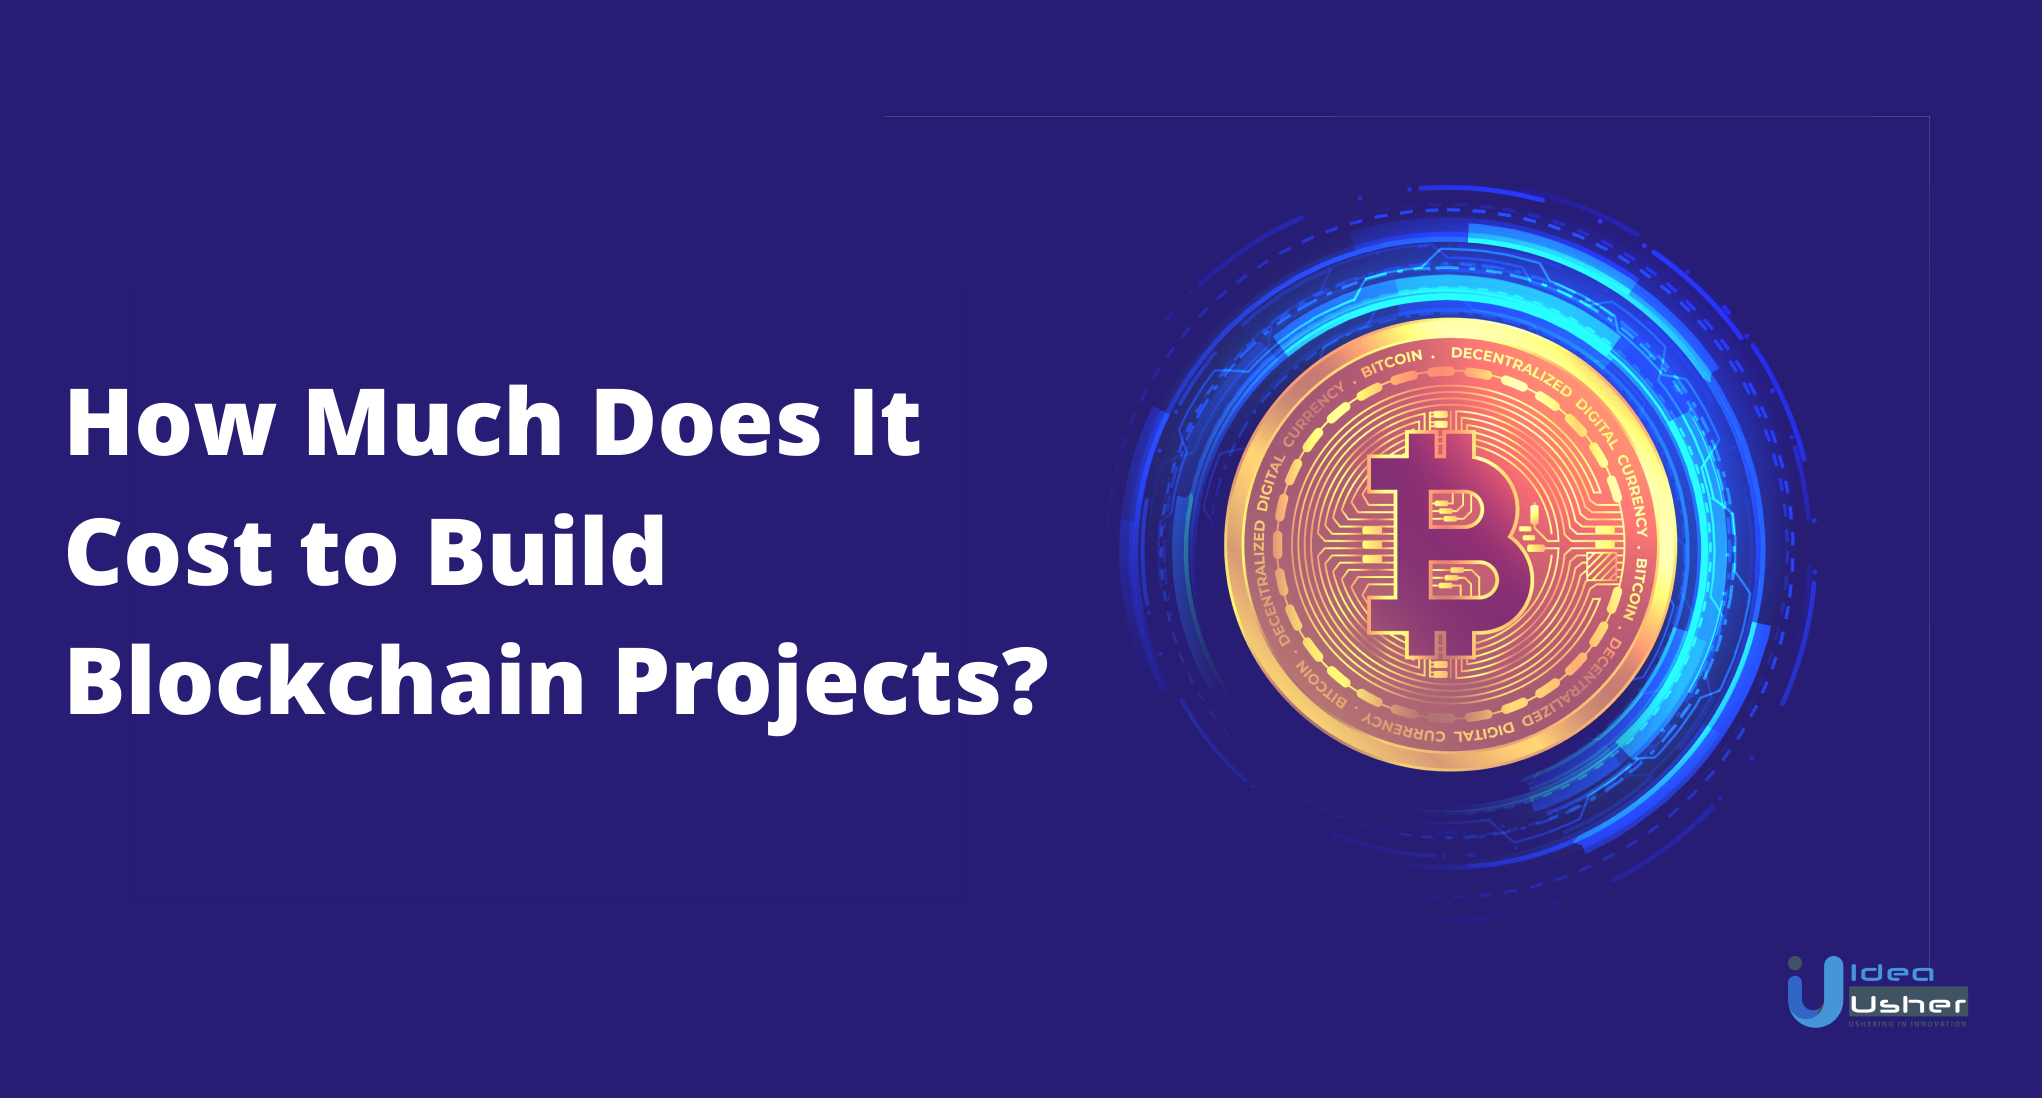 How Much Does It Cost to Build Blockchain Projects?